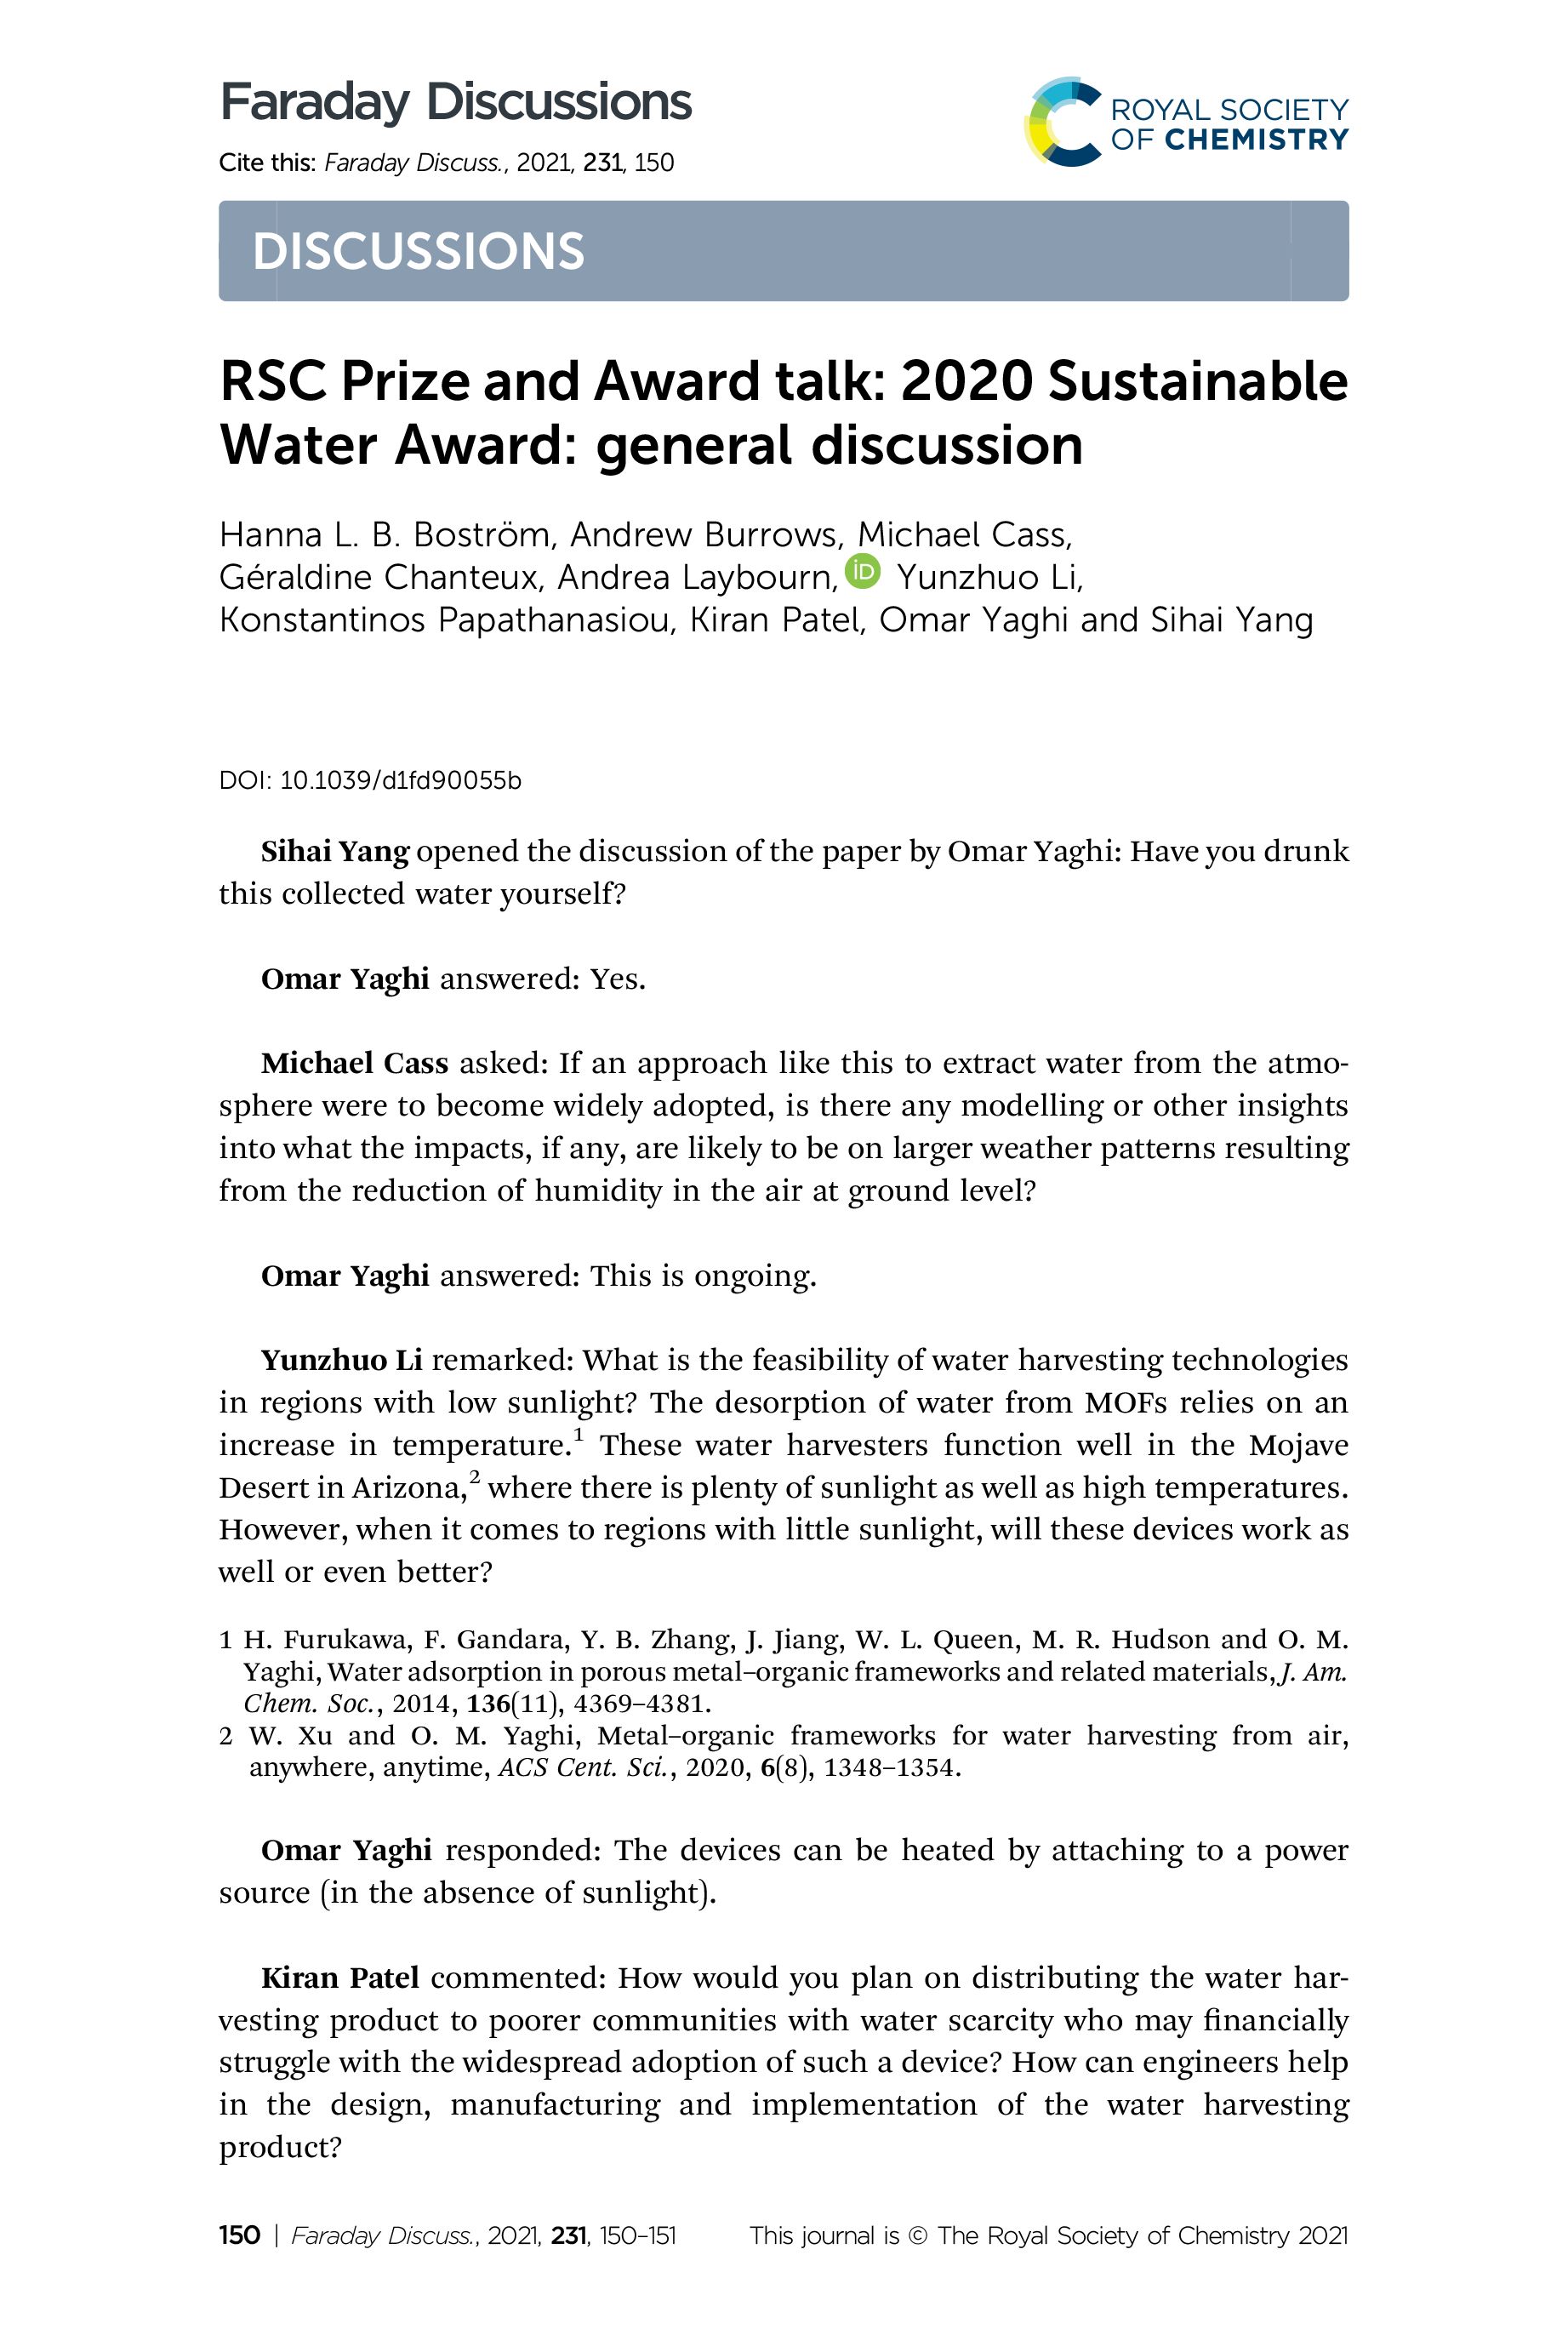 RSC Prize and Award talk: 2020 Sustainable Water Award: general discussion